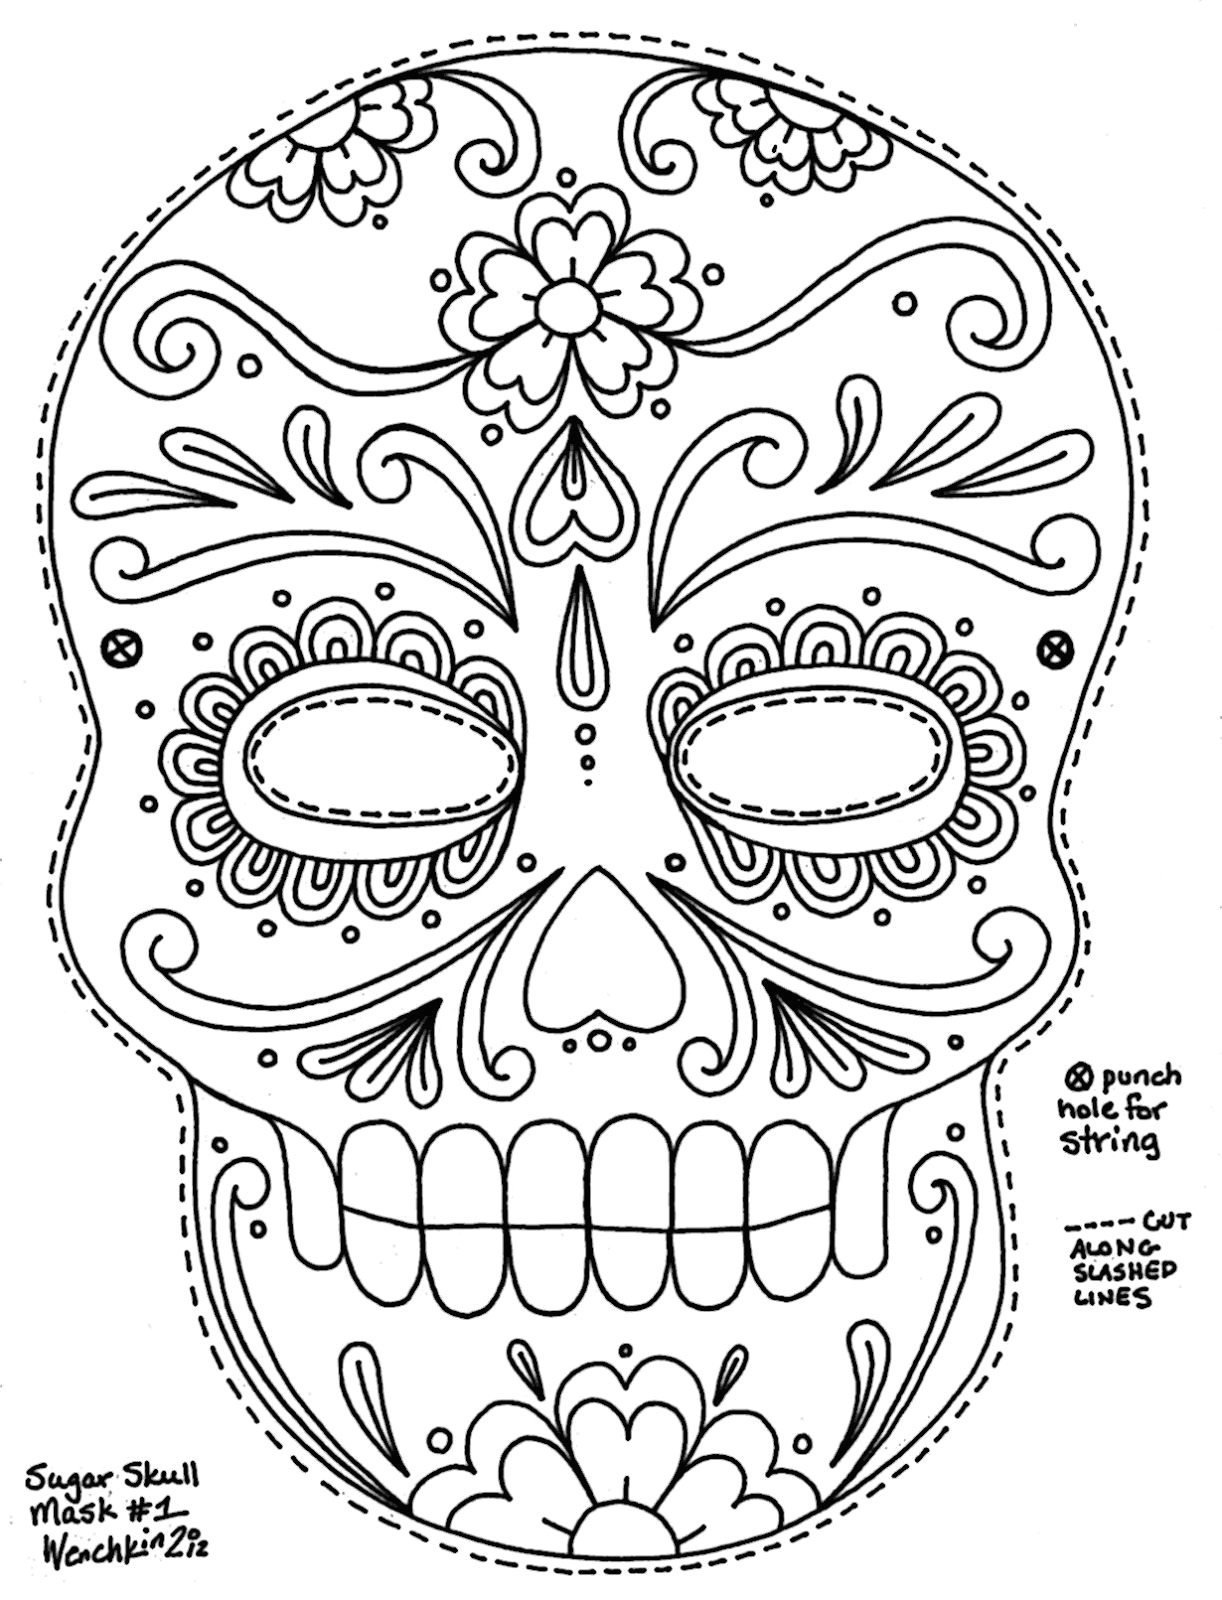 Skull Drawing Printable Sugar Skull Coloring Pages for the Masks It Would Hold Up Better